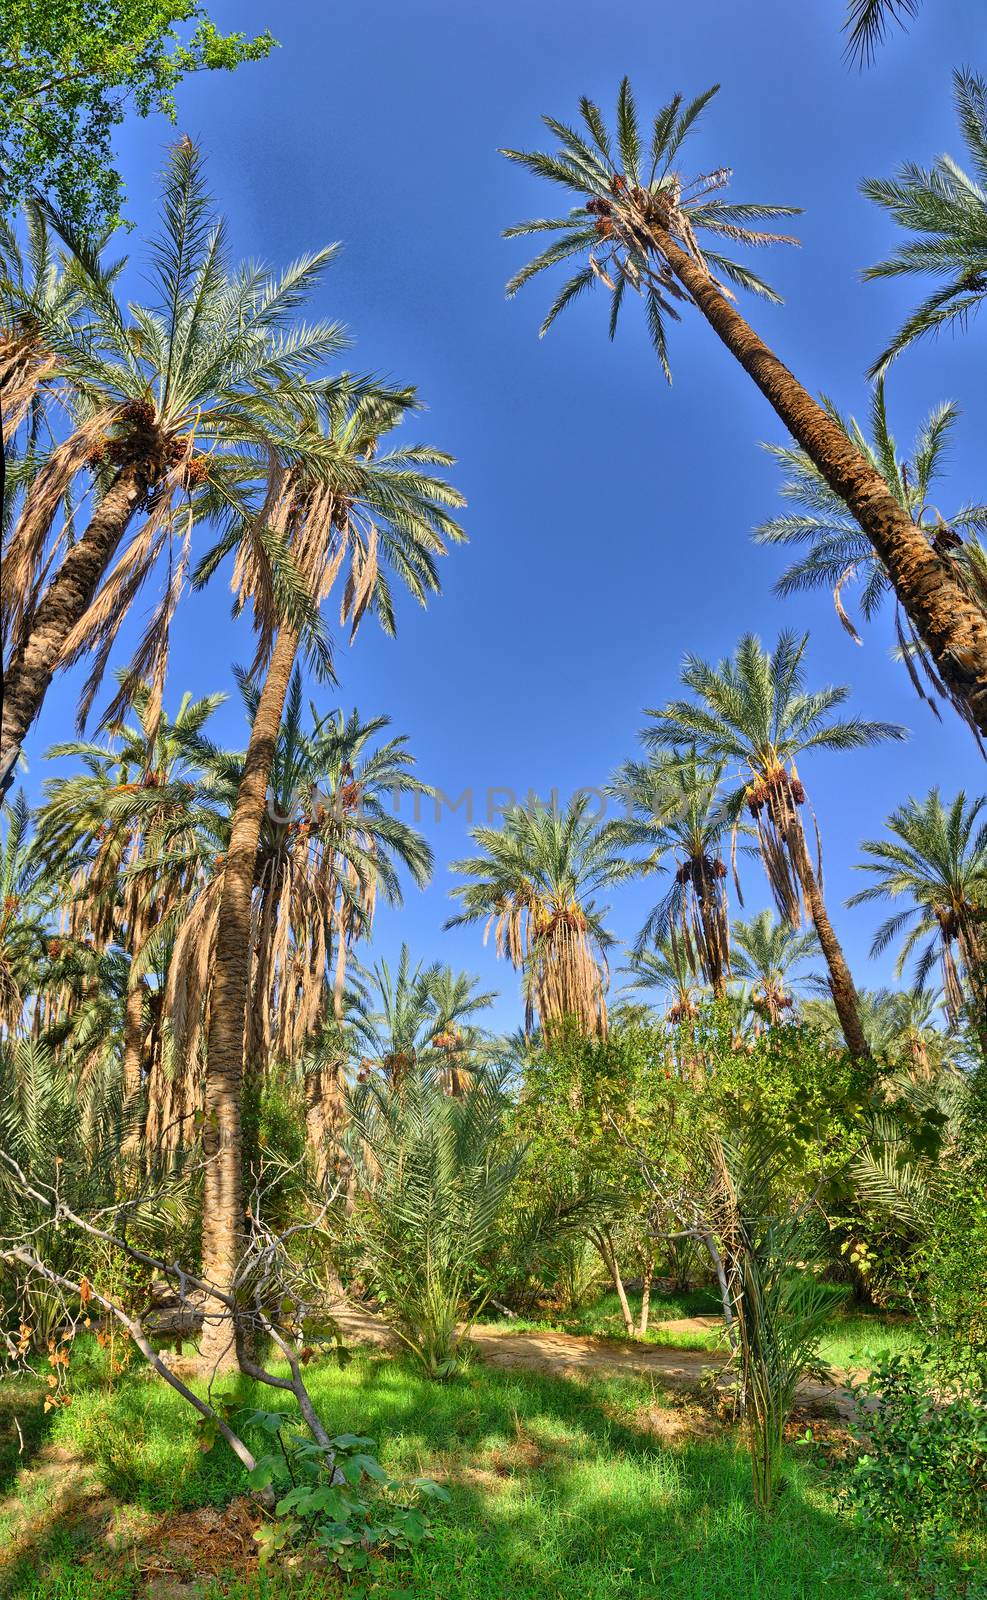 Date Palms in jungles, Tamerza oasis, Sahara Desert, Tunisia, Af by Eagle2308